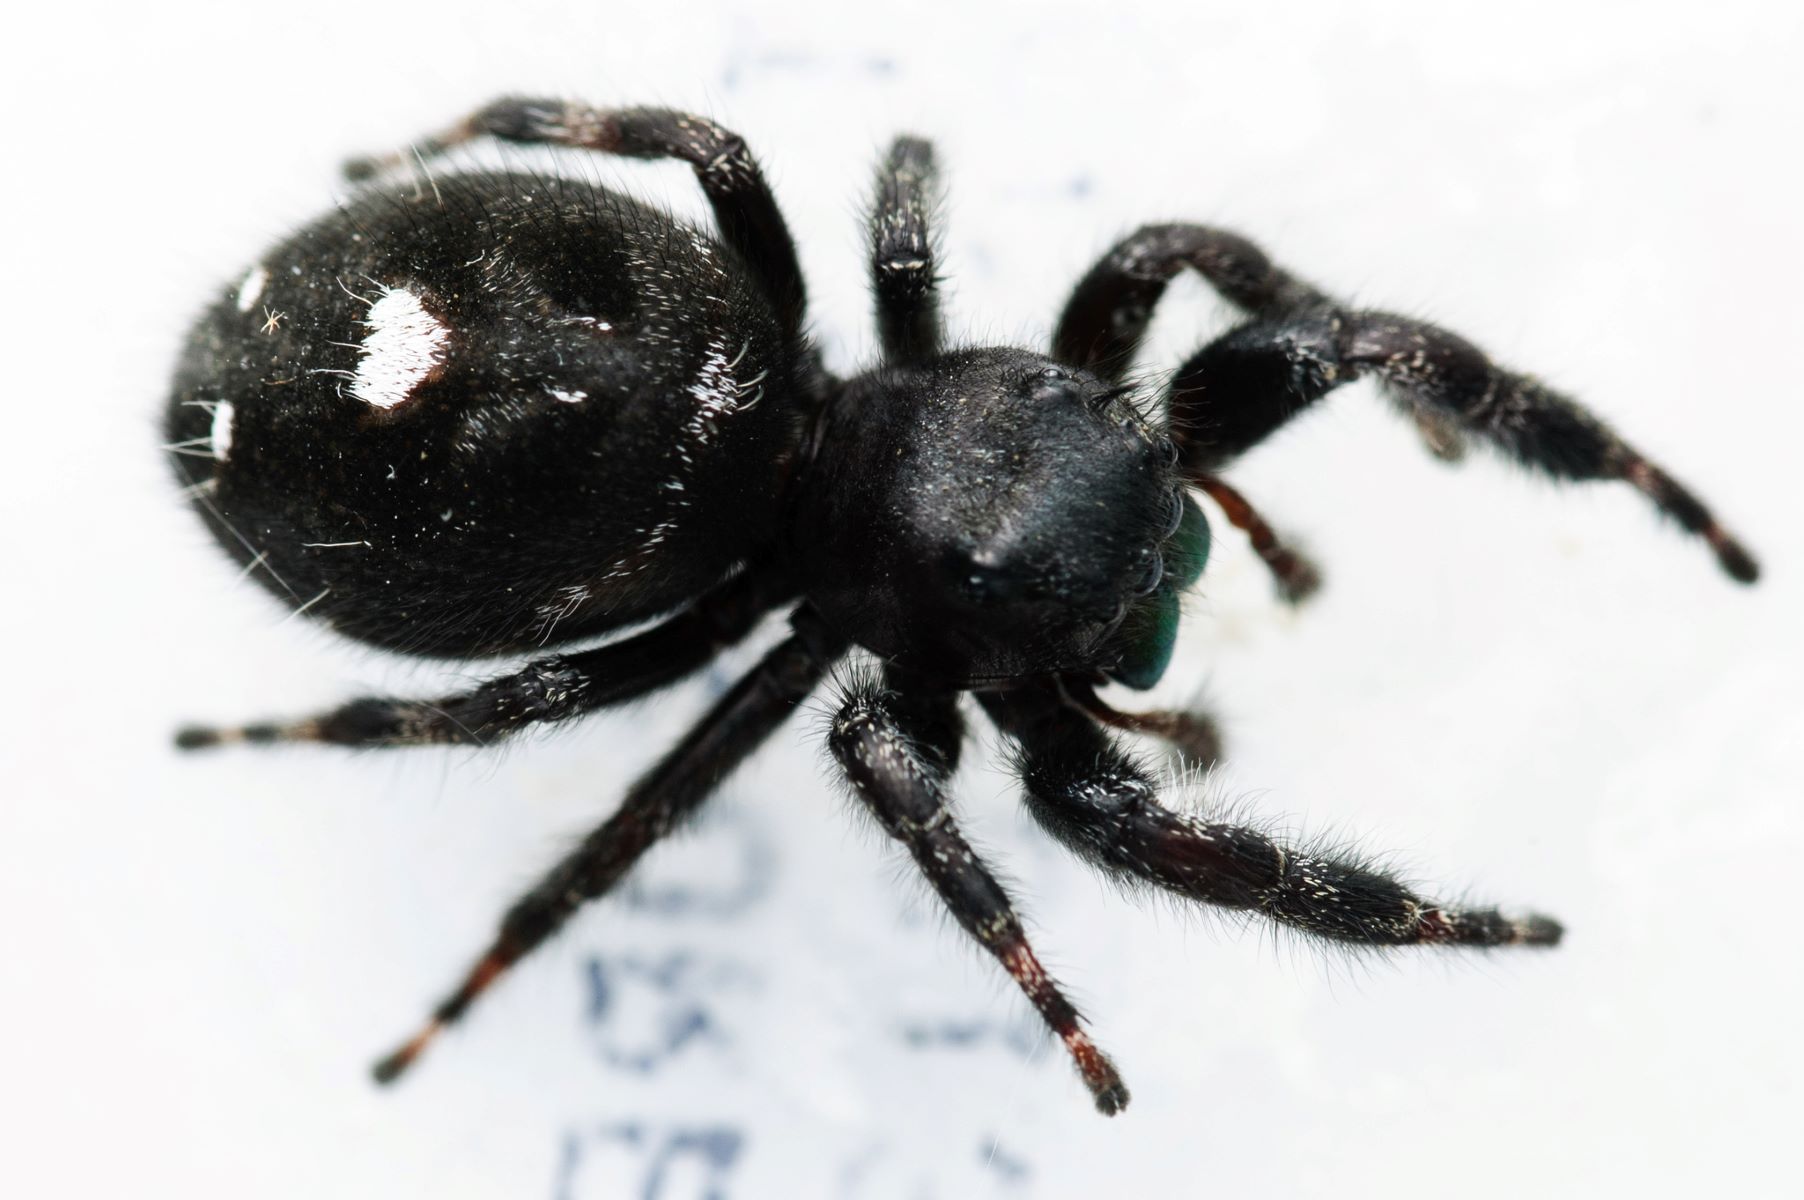 Discover The Mysterious Spider With A Unique White Circle On Its Back!